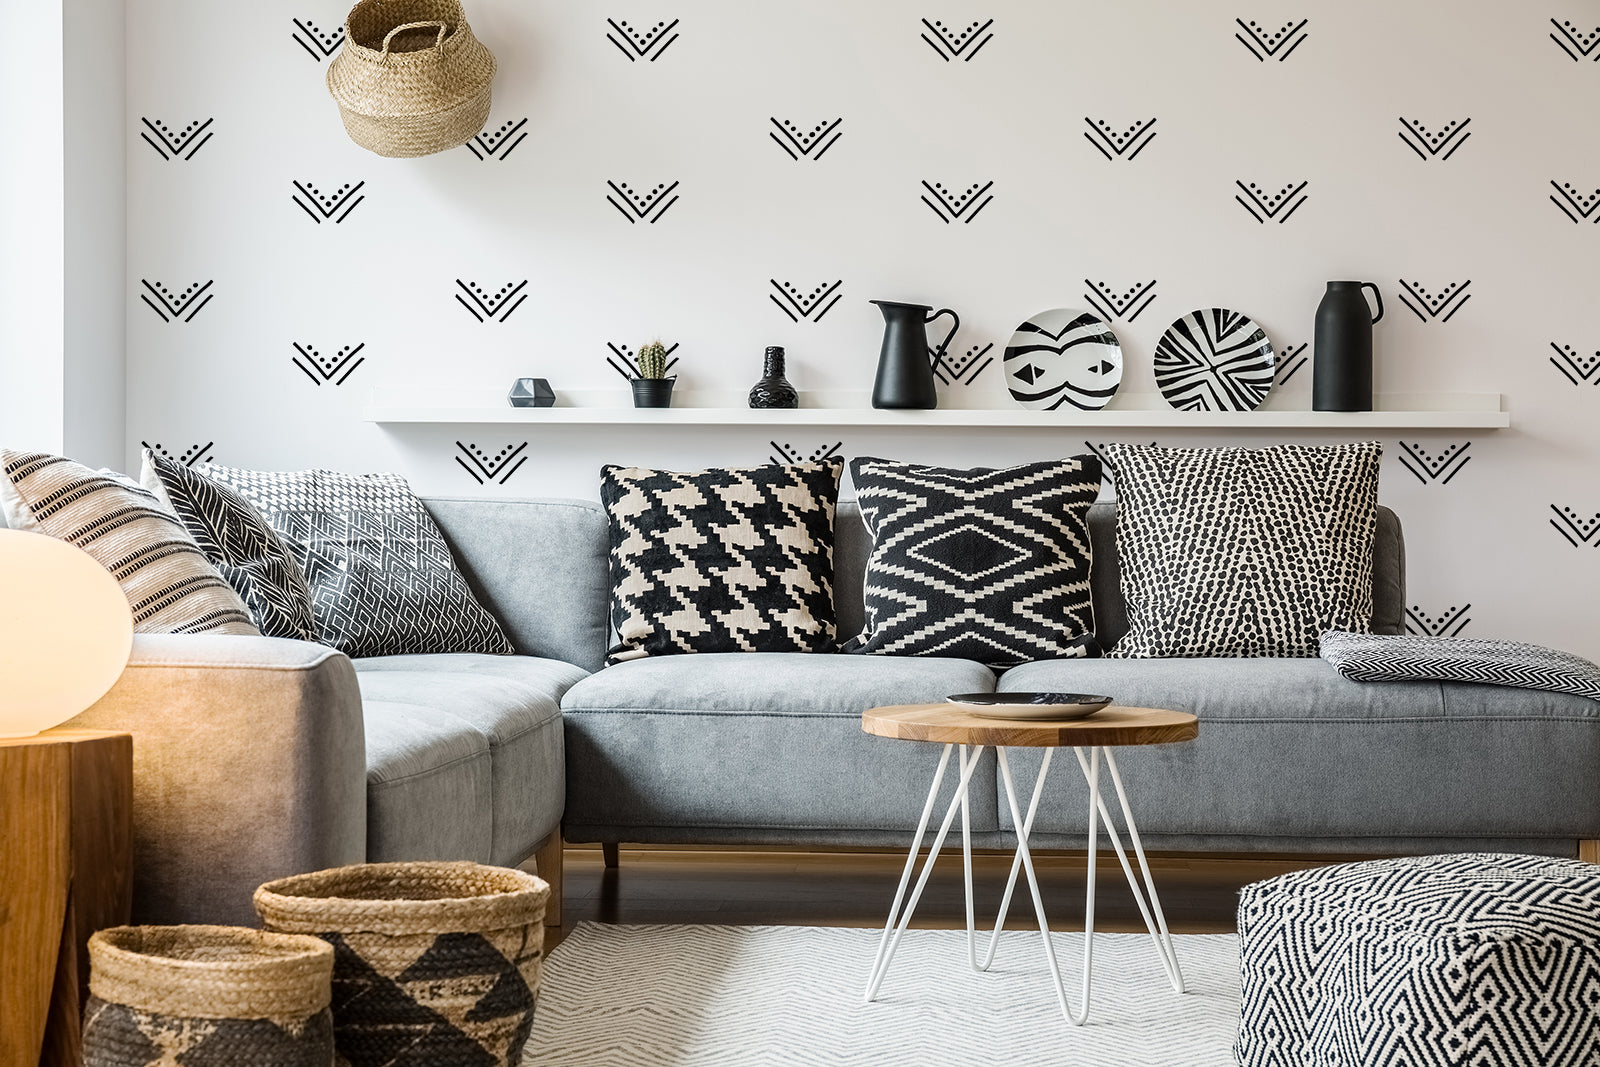 Avalanche Geometric Wall Decals